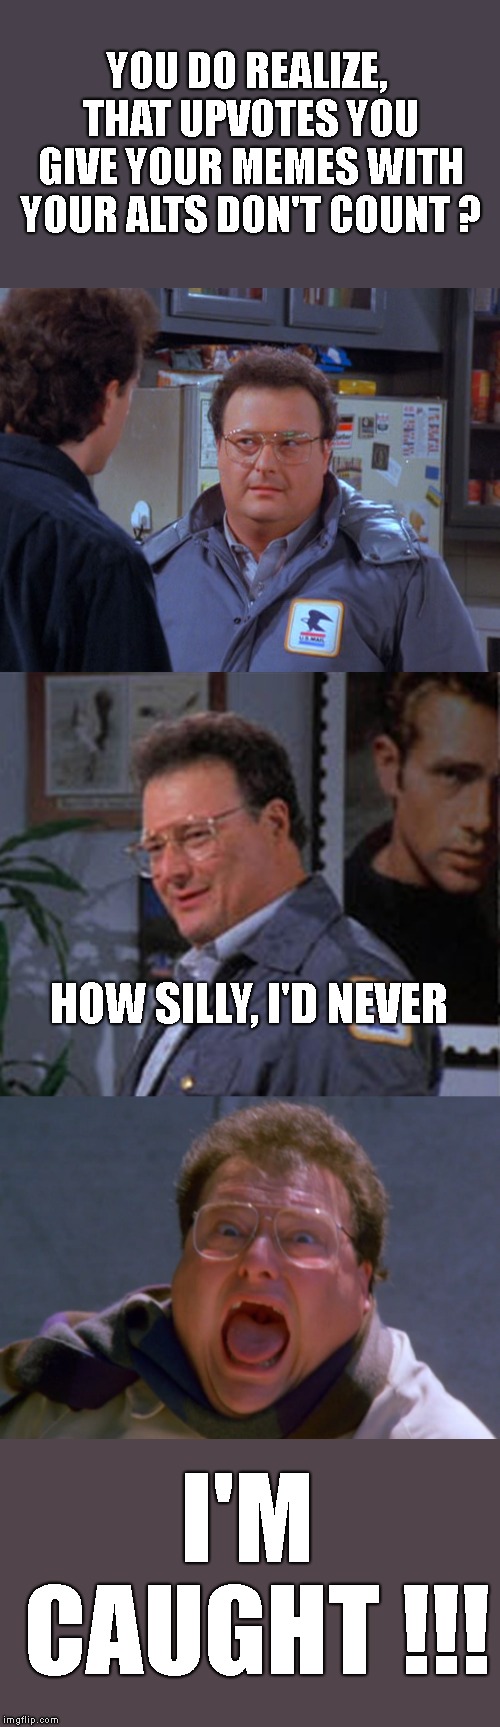 It's so obvious when people do this, and also try and back up a different point of view. Anonymity is nice, abuse isn't. | YOU DO REALIZE, THAT UPVOTES YOU GIVE YOUR MEMES WITH YOUR ALTS DON'T COUNT ? HOW SILLY, I'D NEVER; I'M CAUGHT !!! | image tagged in newman,jerry seinfeld,abuse of imgflip,it's so obvious,upvotes,politics | made w/ Imgflip meme maker